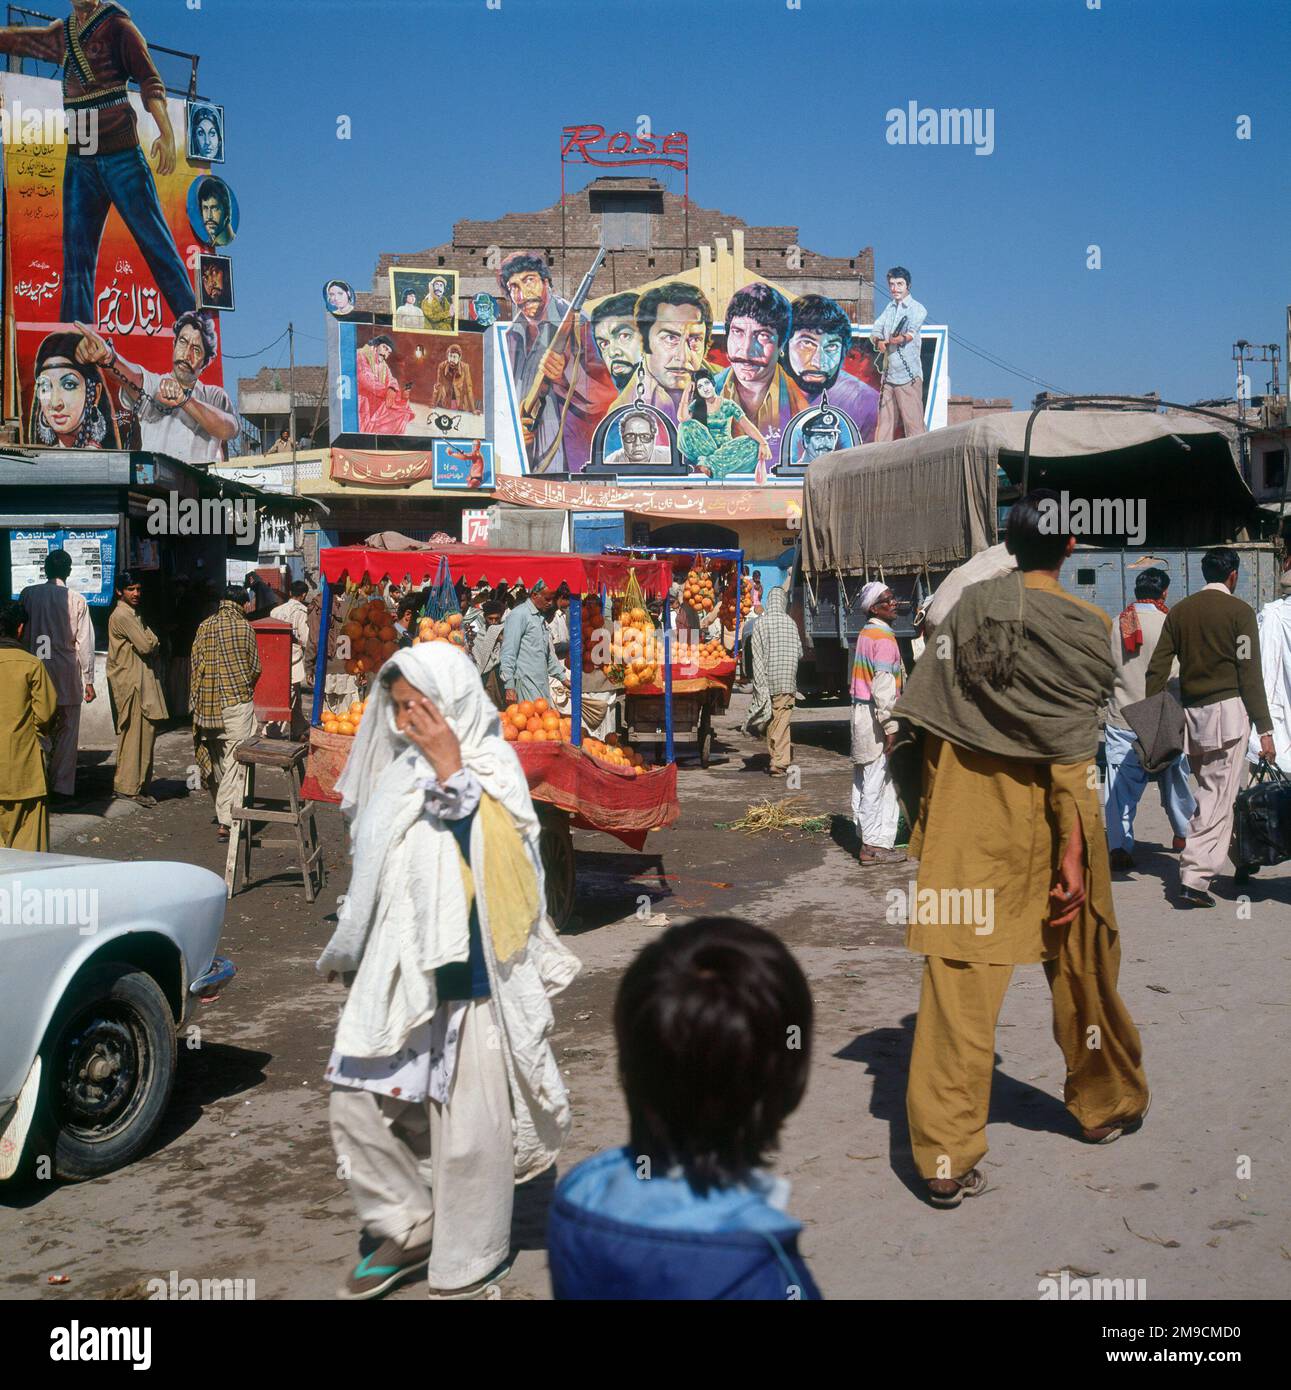 A street scene with some brightly coloured cinema posters in the background. Stock Photo